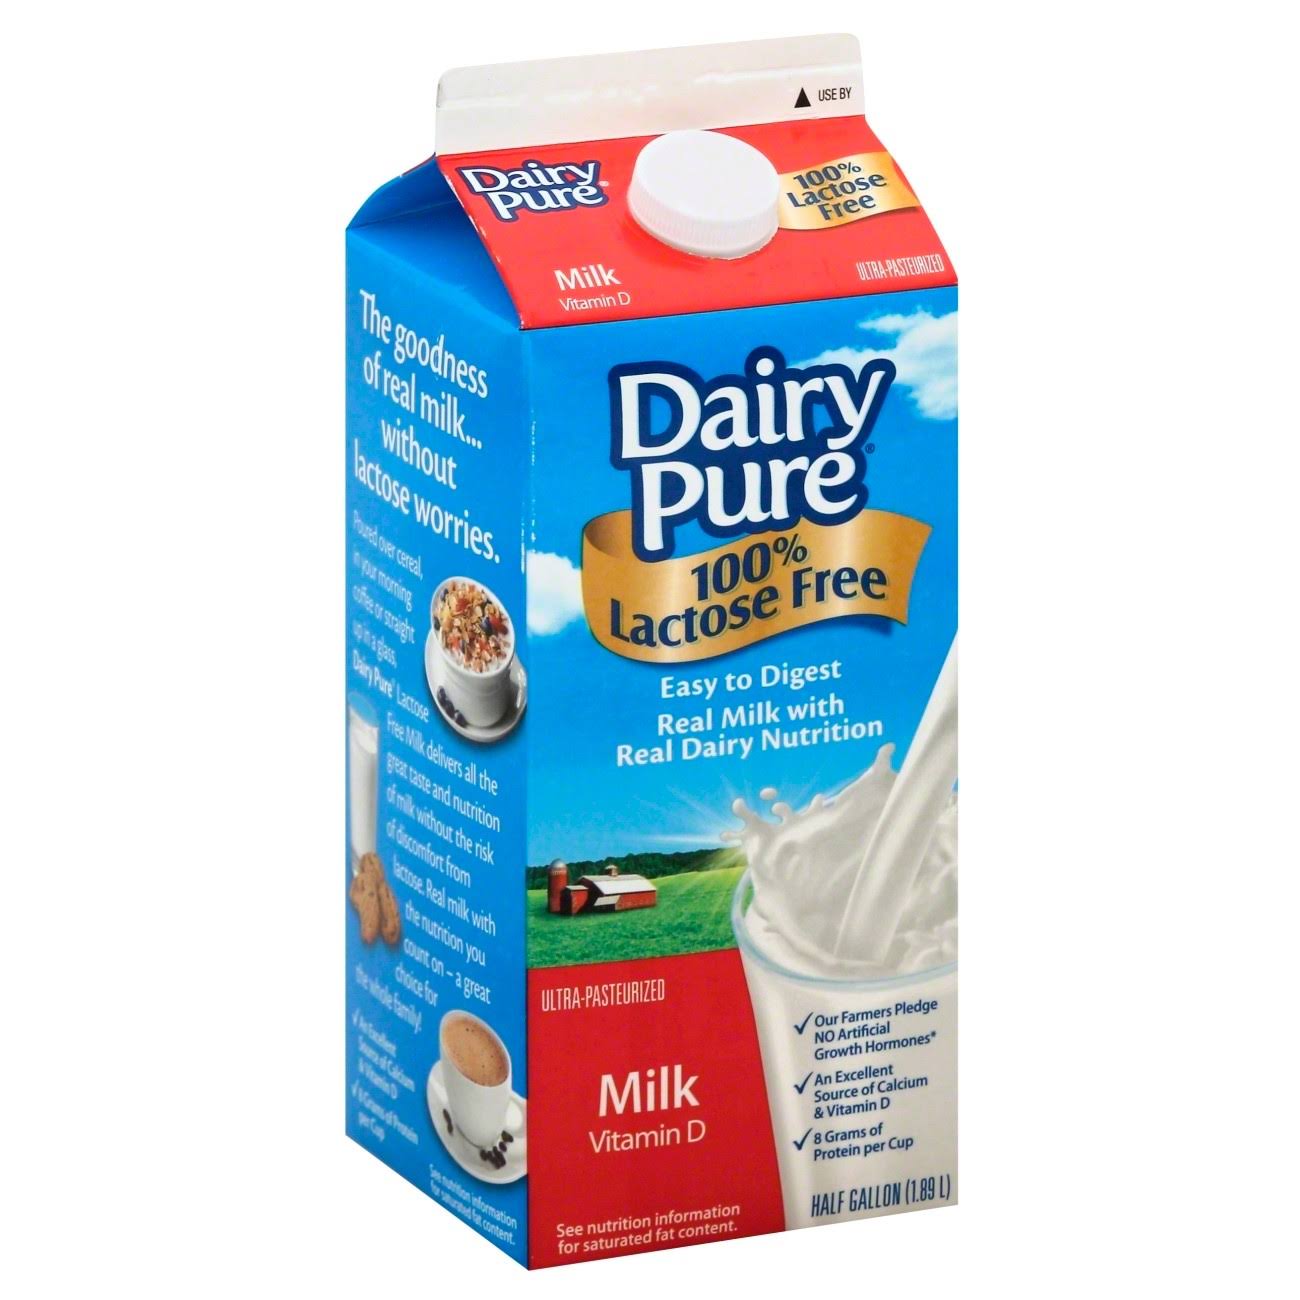 Dairy Pure Lactose Free Whole Milk - 0.5gal